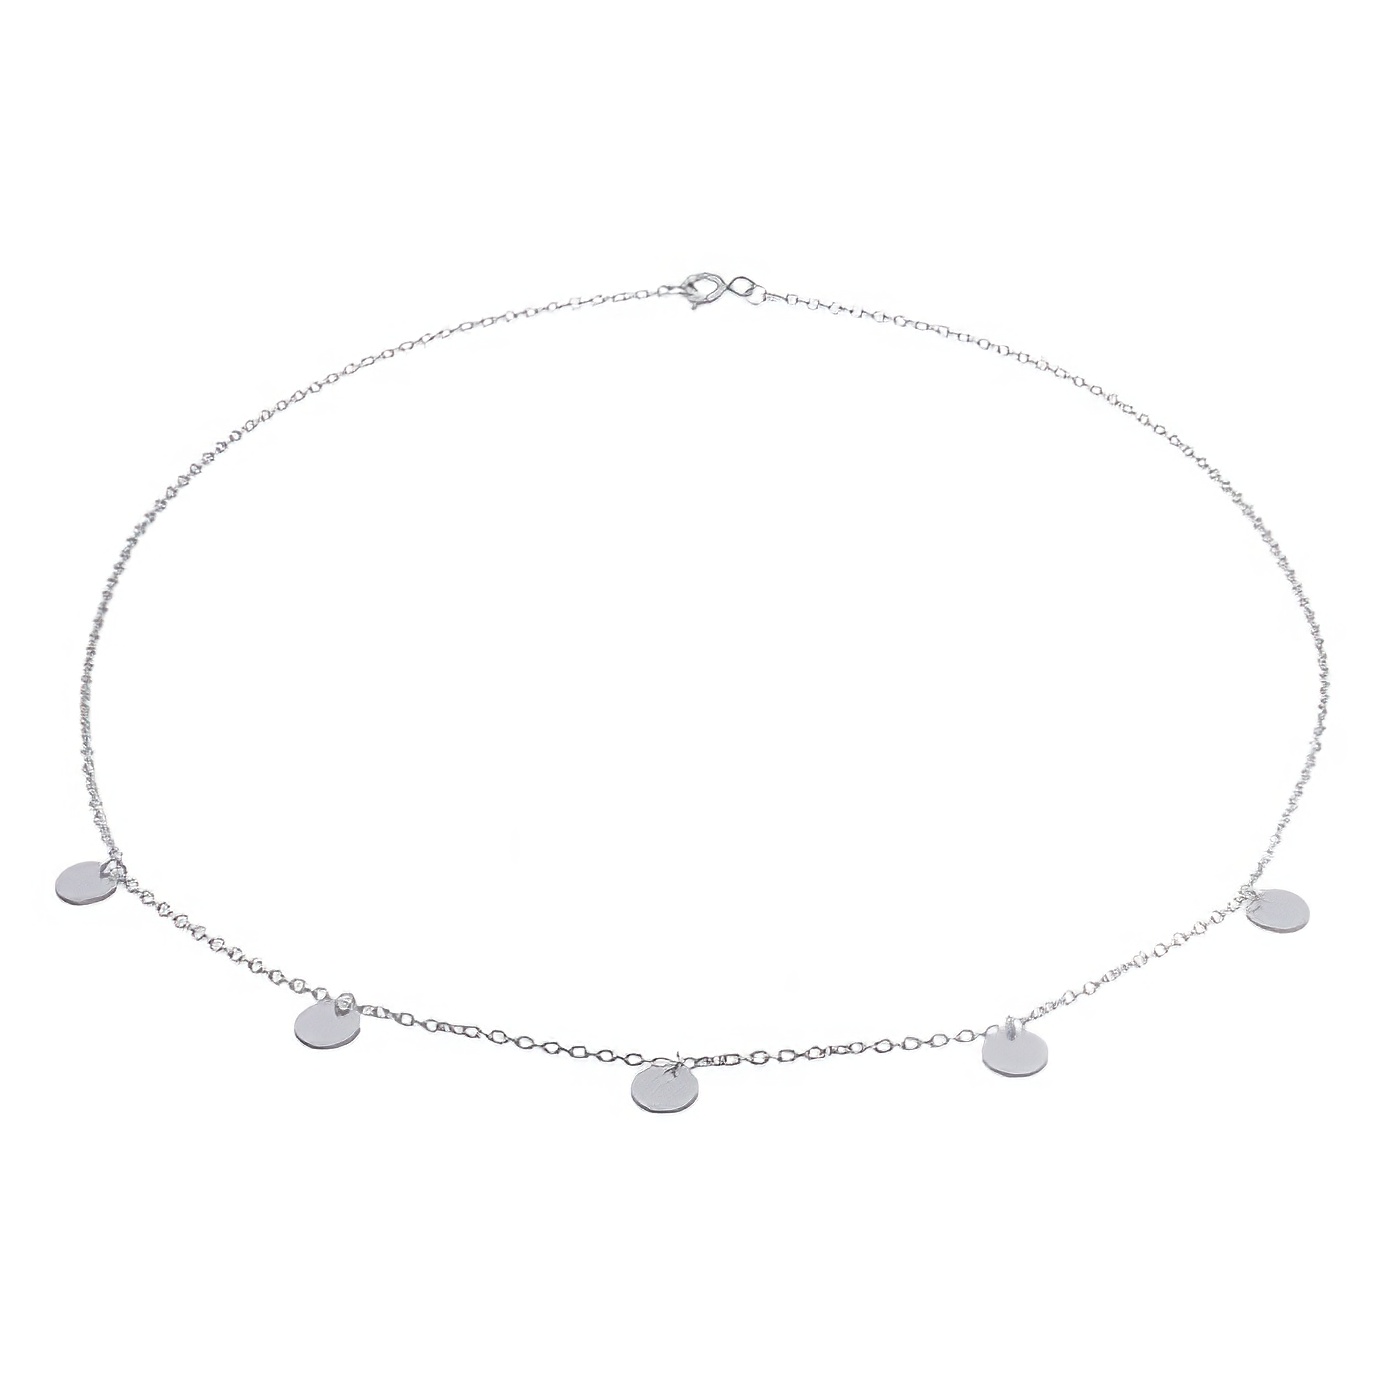 Five Circle Discs Hang Out 925 Silver Chain Necklace by BeYindi 